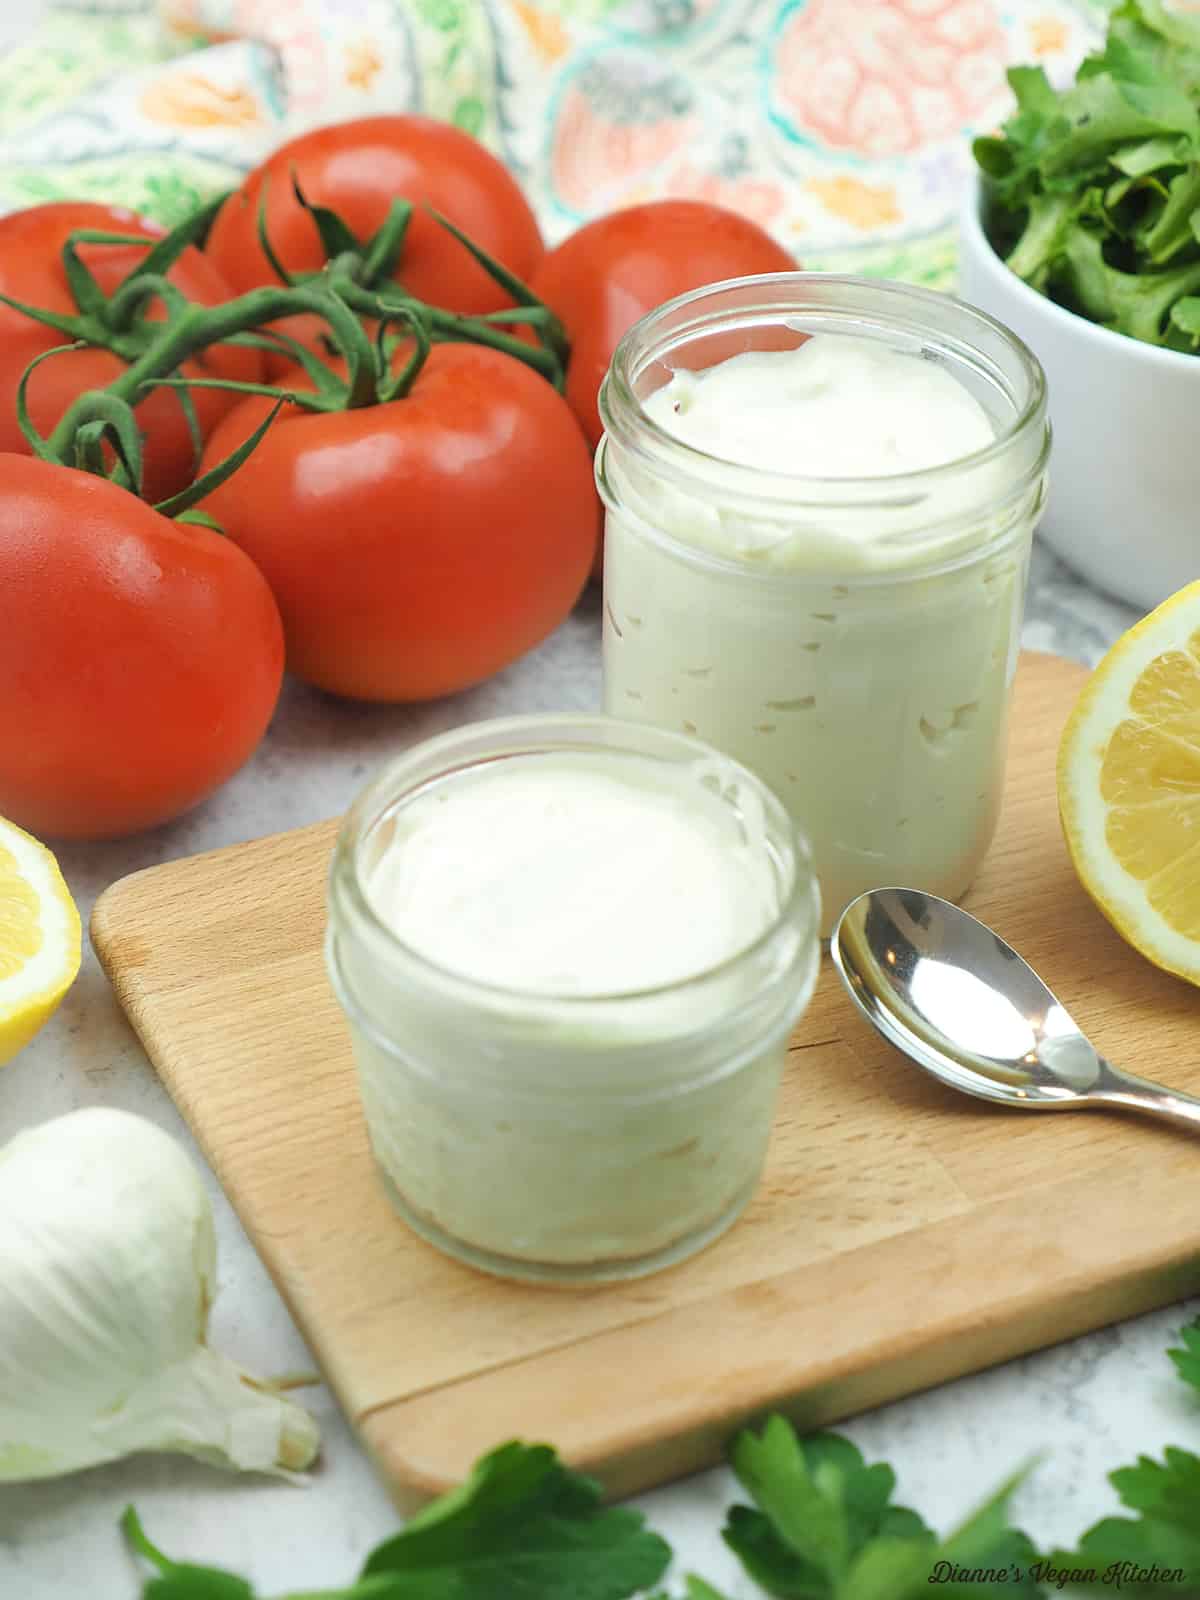 Two jars of vegan mayonnaise with tomatoes, lettuce, lemon and garlic